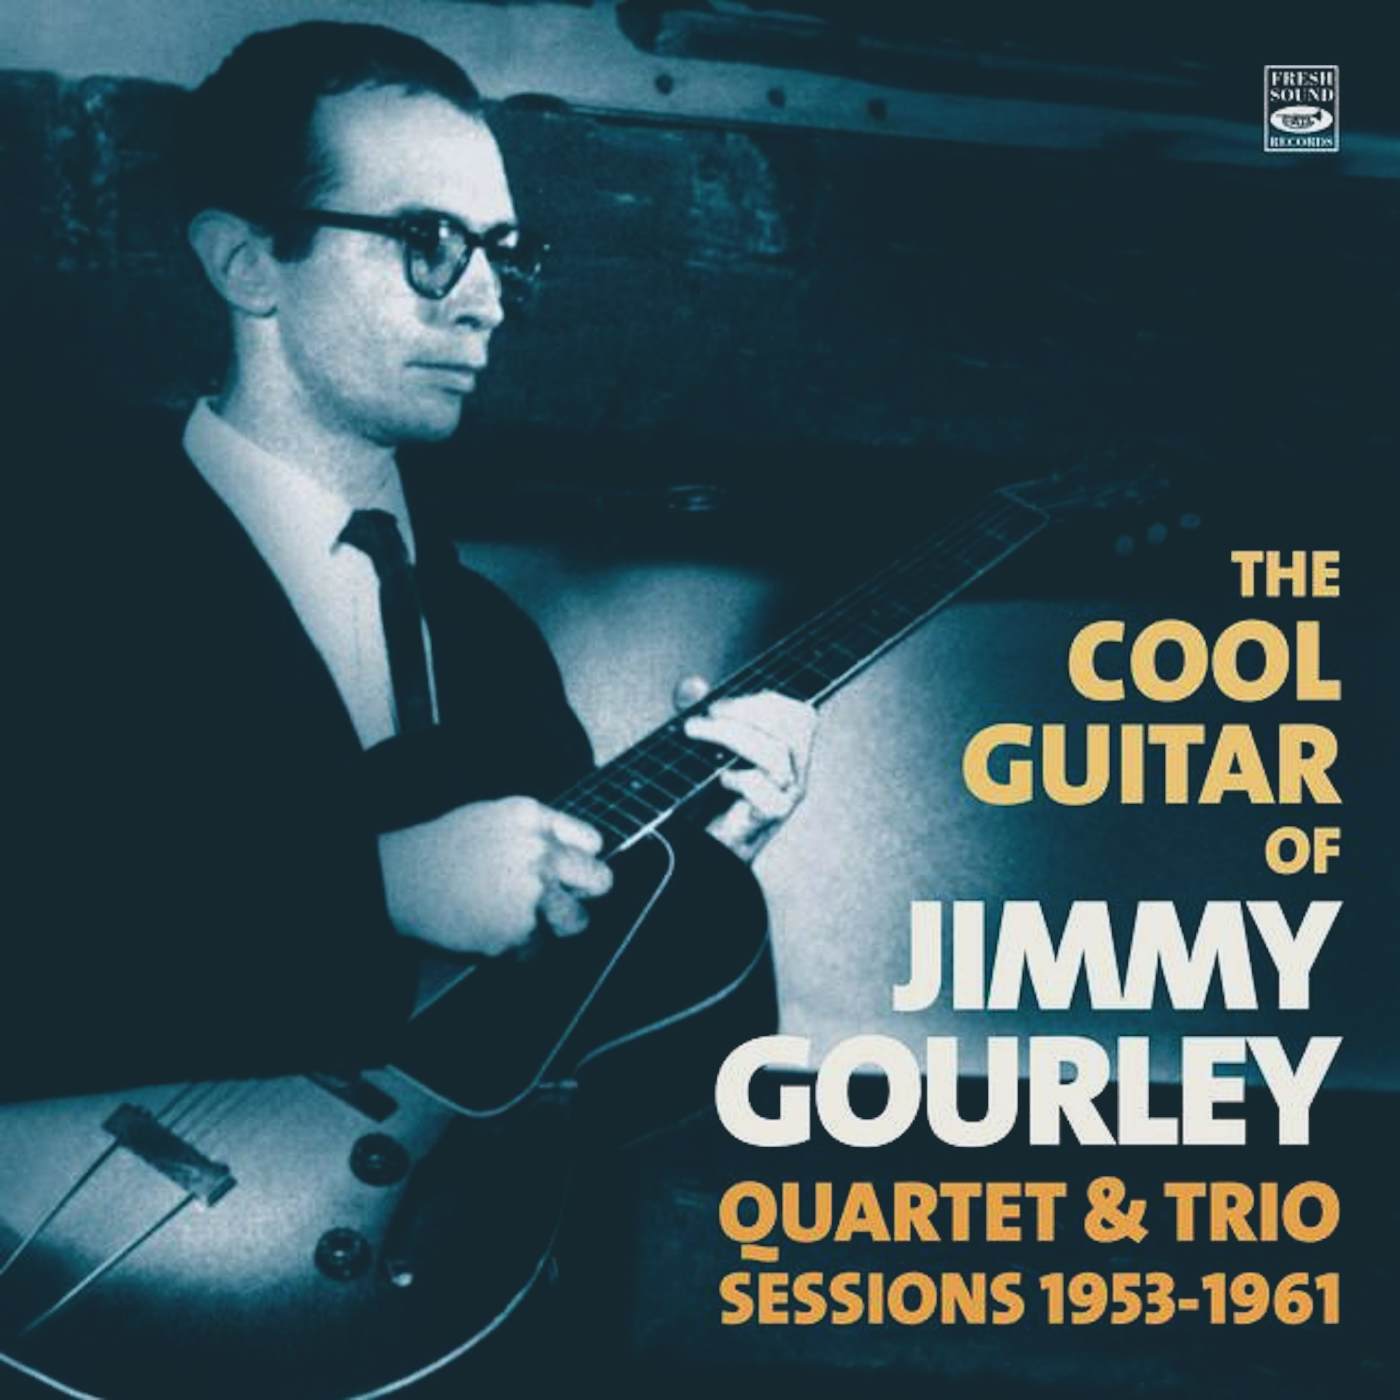 Jimmy Gourley